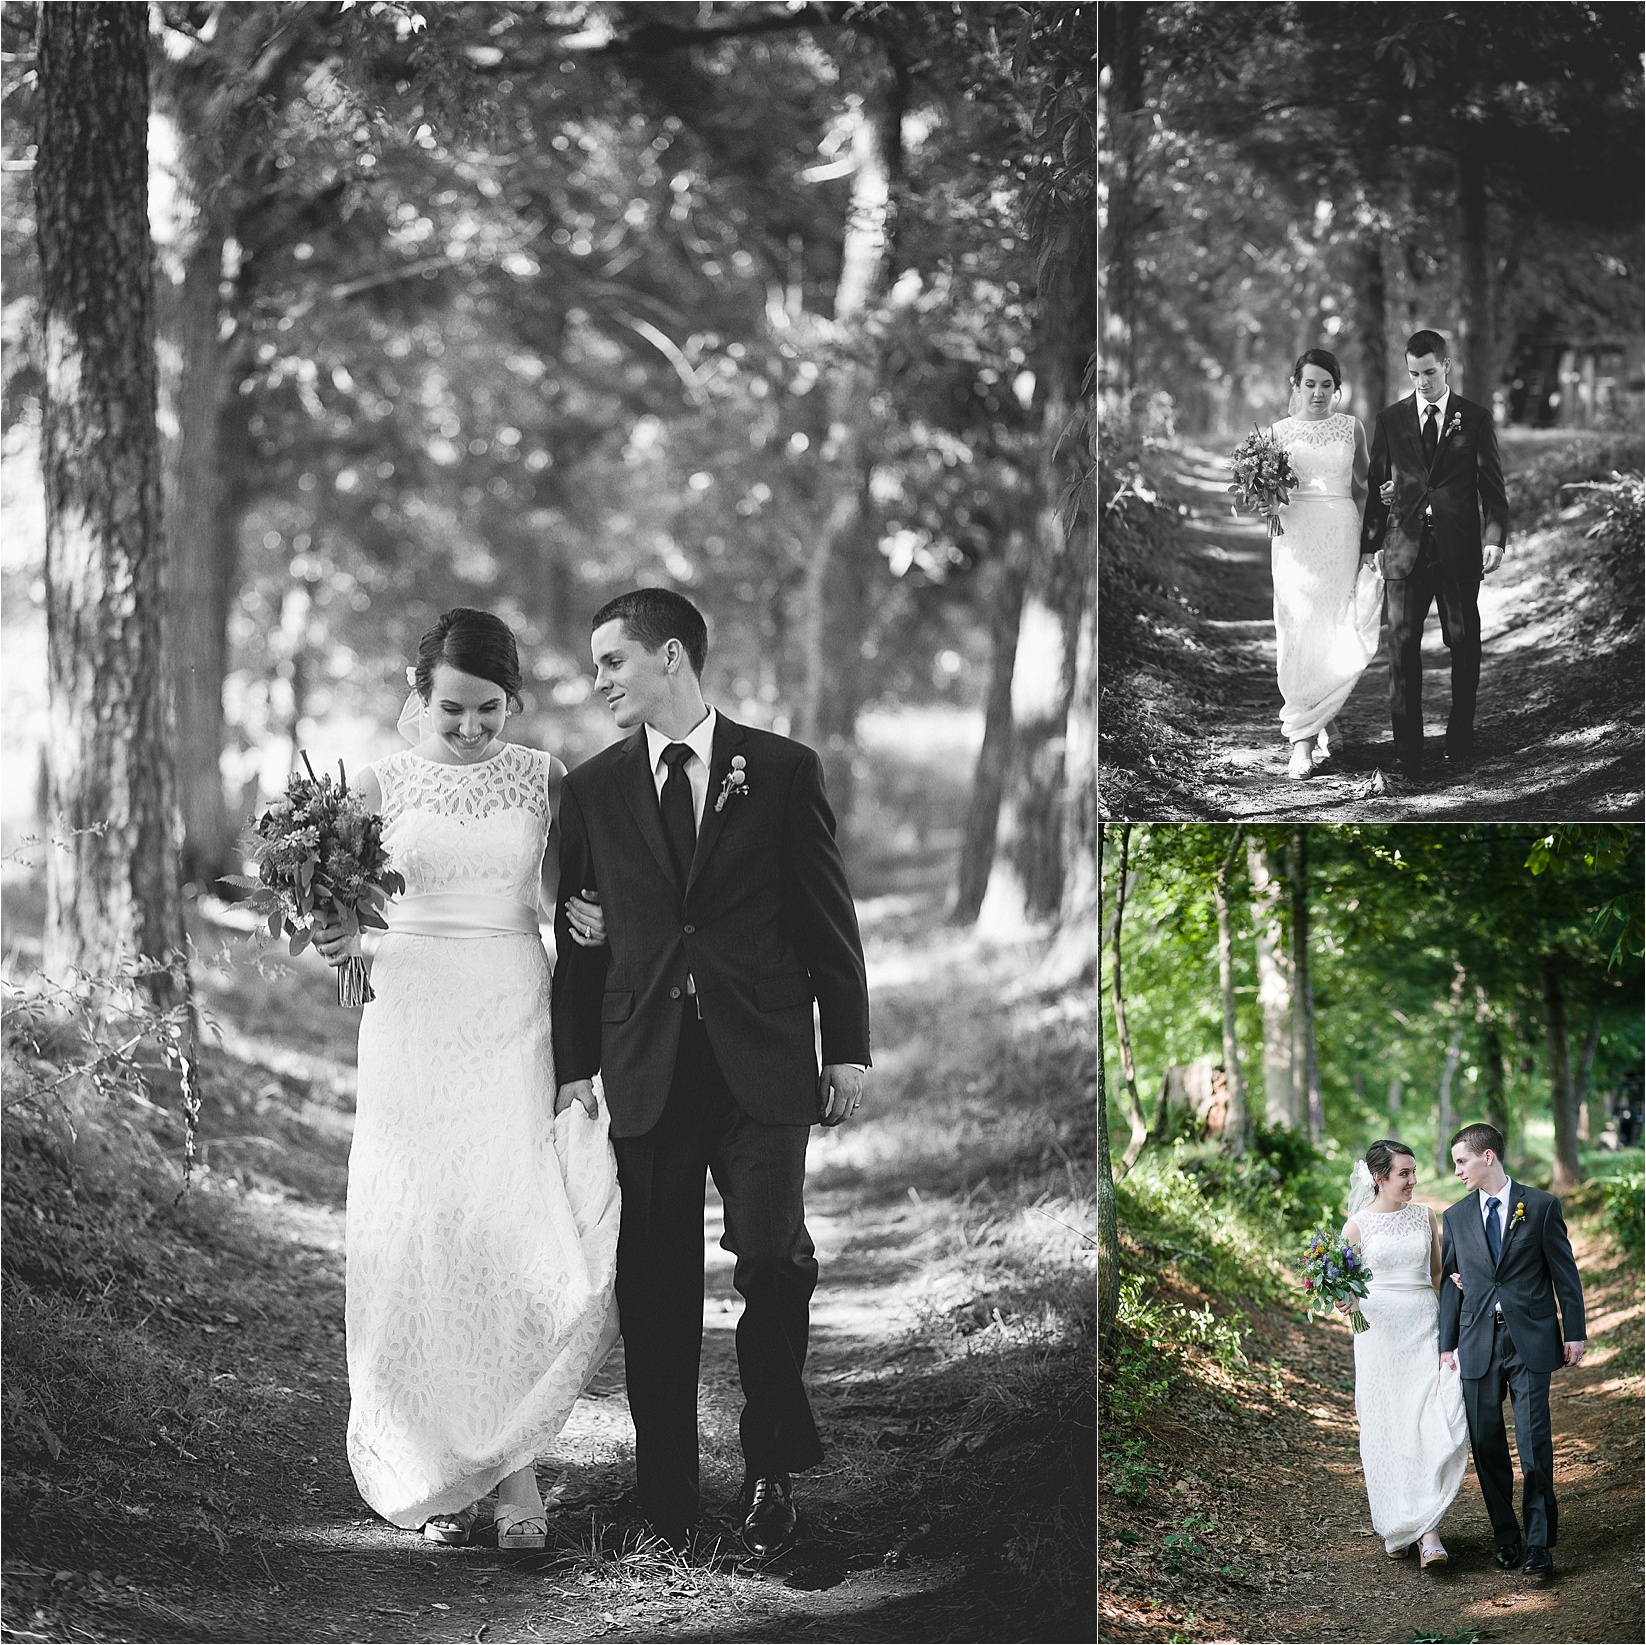 Walking down the path together at Caroline and Evans mountain wedding at yesterday spaces in asheville leicester north carolina